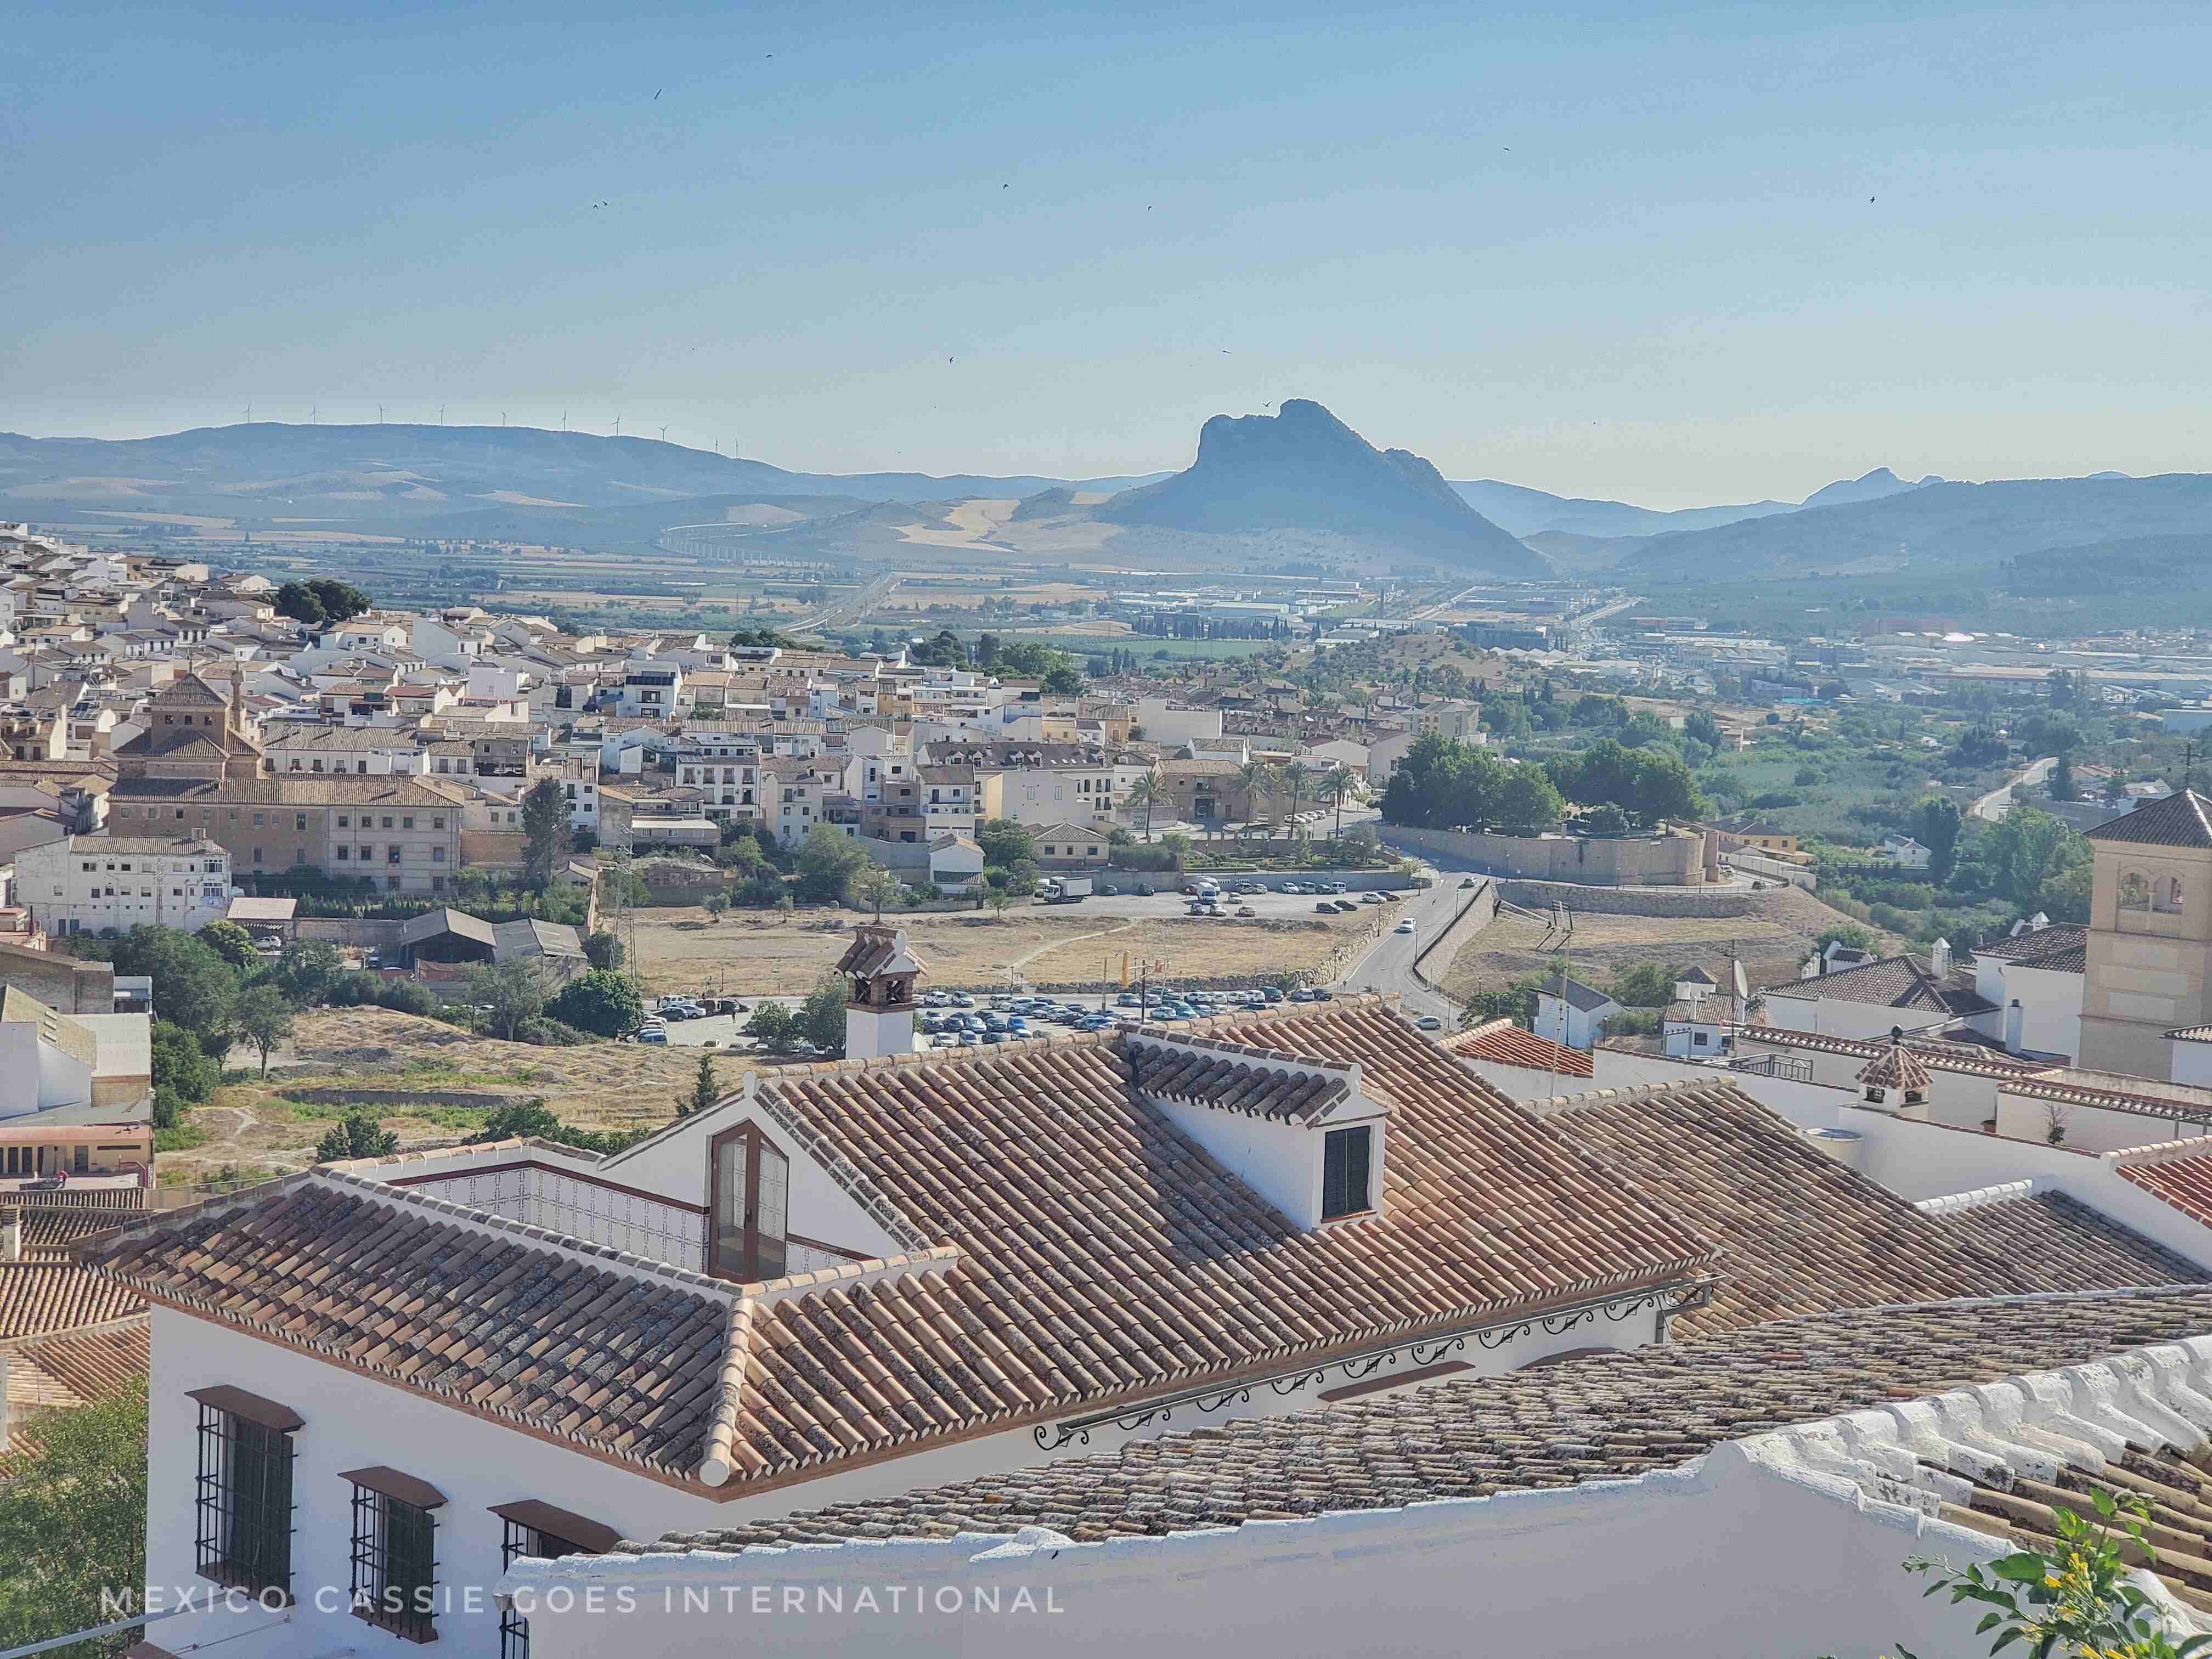 view over roofs of Antequera. Rocks resembling a prone face in background